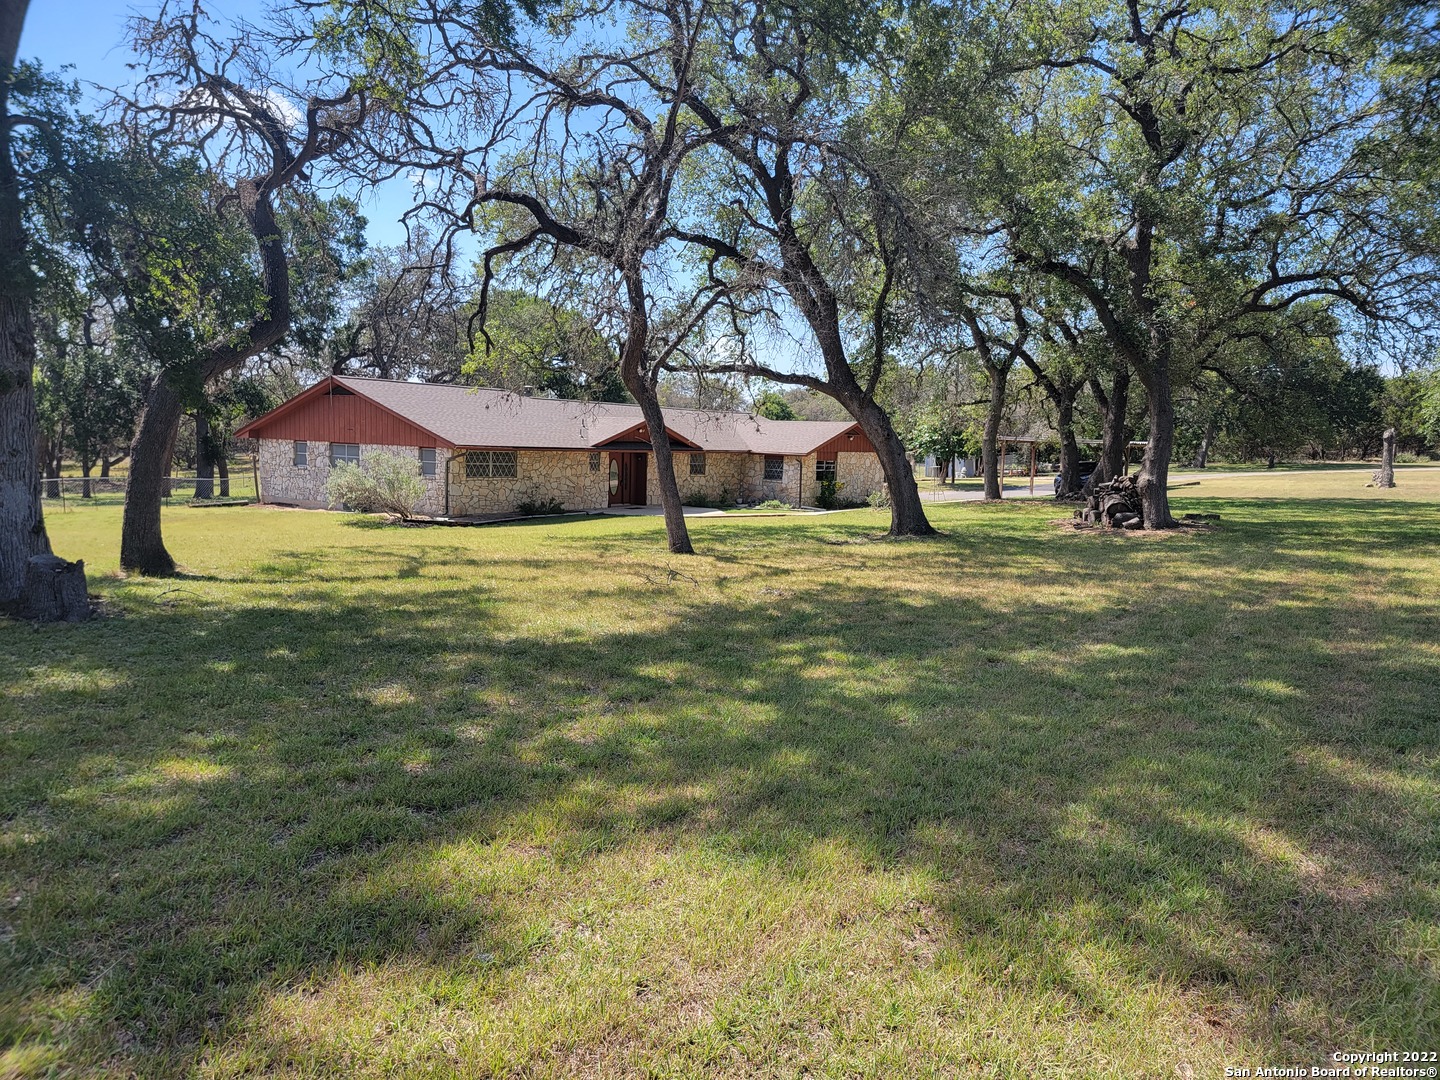 6 ACRE Lot in Boerne, you can have Horses!! Wow! This 4/3/2 home is country living at its finest! This home offers all the convenience of a modern home, yet has a distinct tasteful country feel. The focal point of the home is the living room boasting lots of character with vaulted ceilings, fireplace and stone accent wall. There is a sunroom just of the living room that may serve as second living area with two sliding glass doors providing a view of the covered deck and rear yard. Then step down into a third living area, the den, featuring an antique wood burning fireplace and a sliding glass door allowing access to the deck. The kitchen is spacious offering recently installed cabinets, granite countertops, and stainless steel appliances. The oversized two car garage is ideal for a workshop. Other features include a guest bedroom with a private bath, recently installed roof, foundation repairs, laminate wood flooring, plush carpet, fresh paint, electric gate at entrance to property, an above ground pool, horse stalls/large shed, mature trees and more. Come see for yourself. You won't be disappointed !